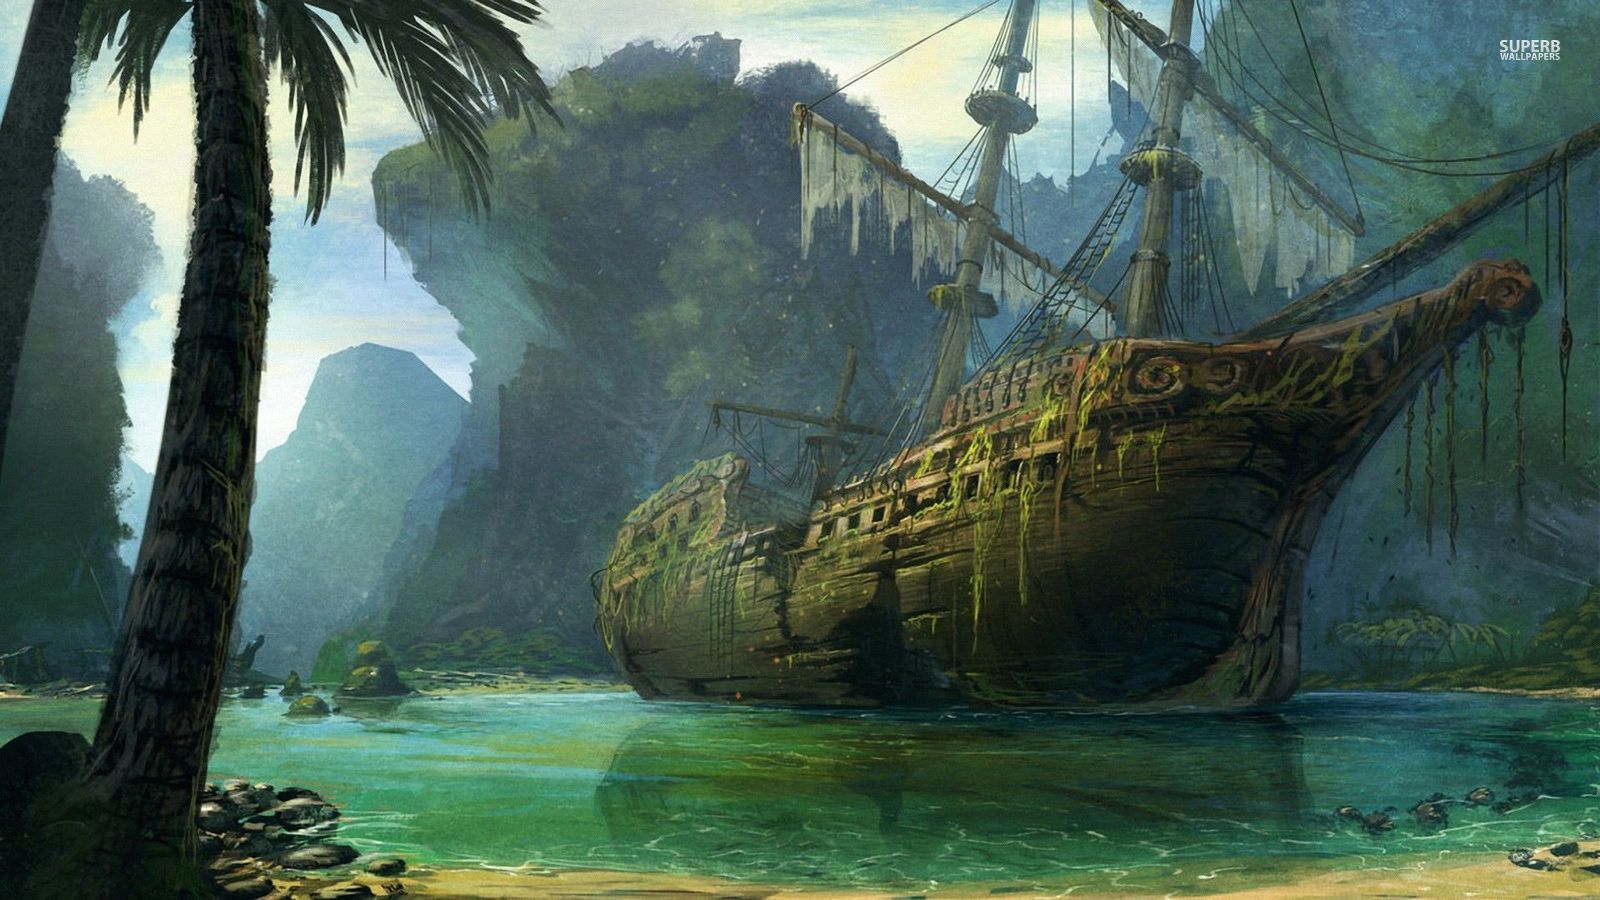 Pirates Image Pirate Ship HD Wallpaper And Background Photos